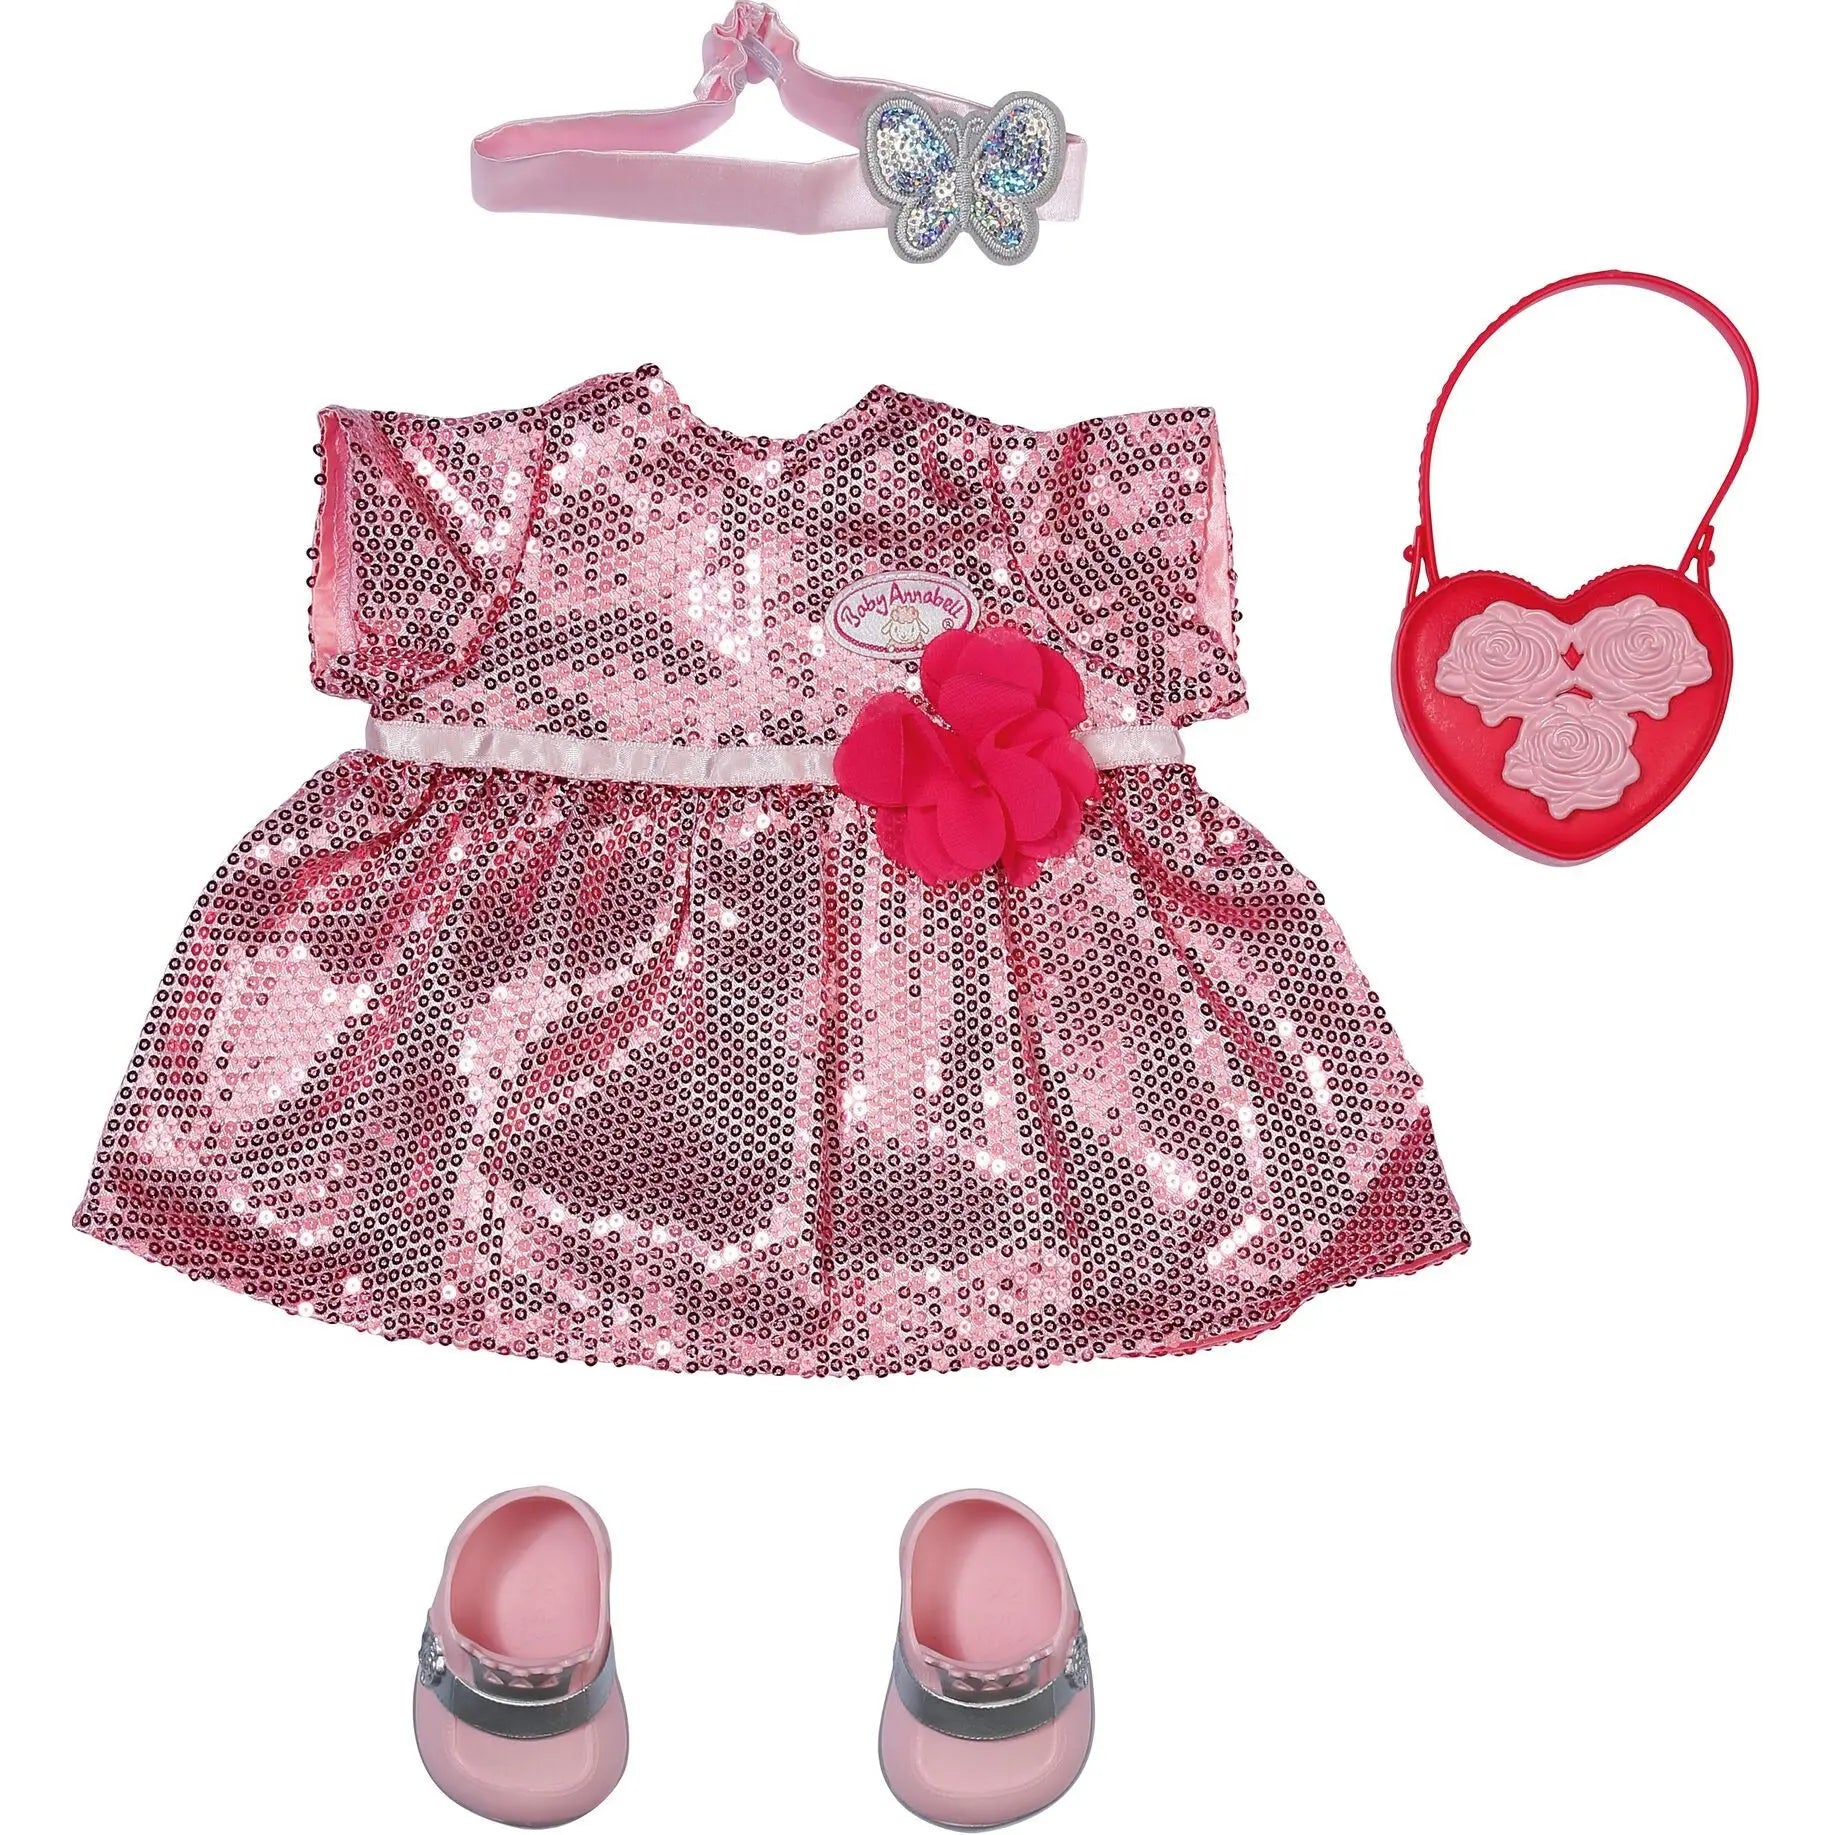 Baby Annabell Deluxe Glamour Outfit 43cm Baby Annabell